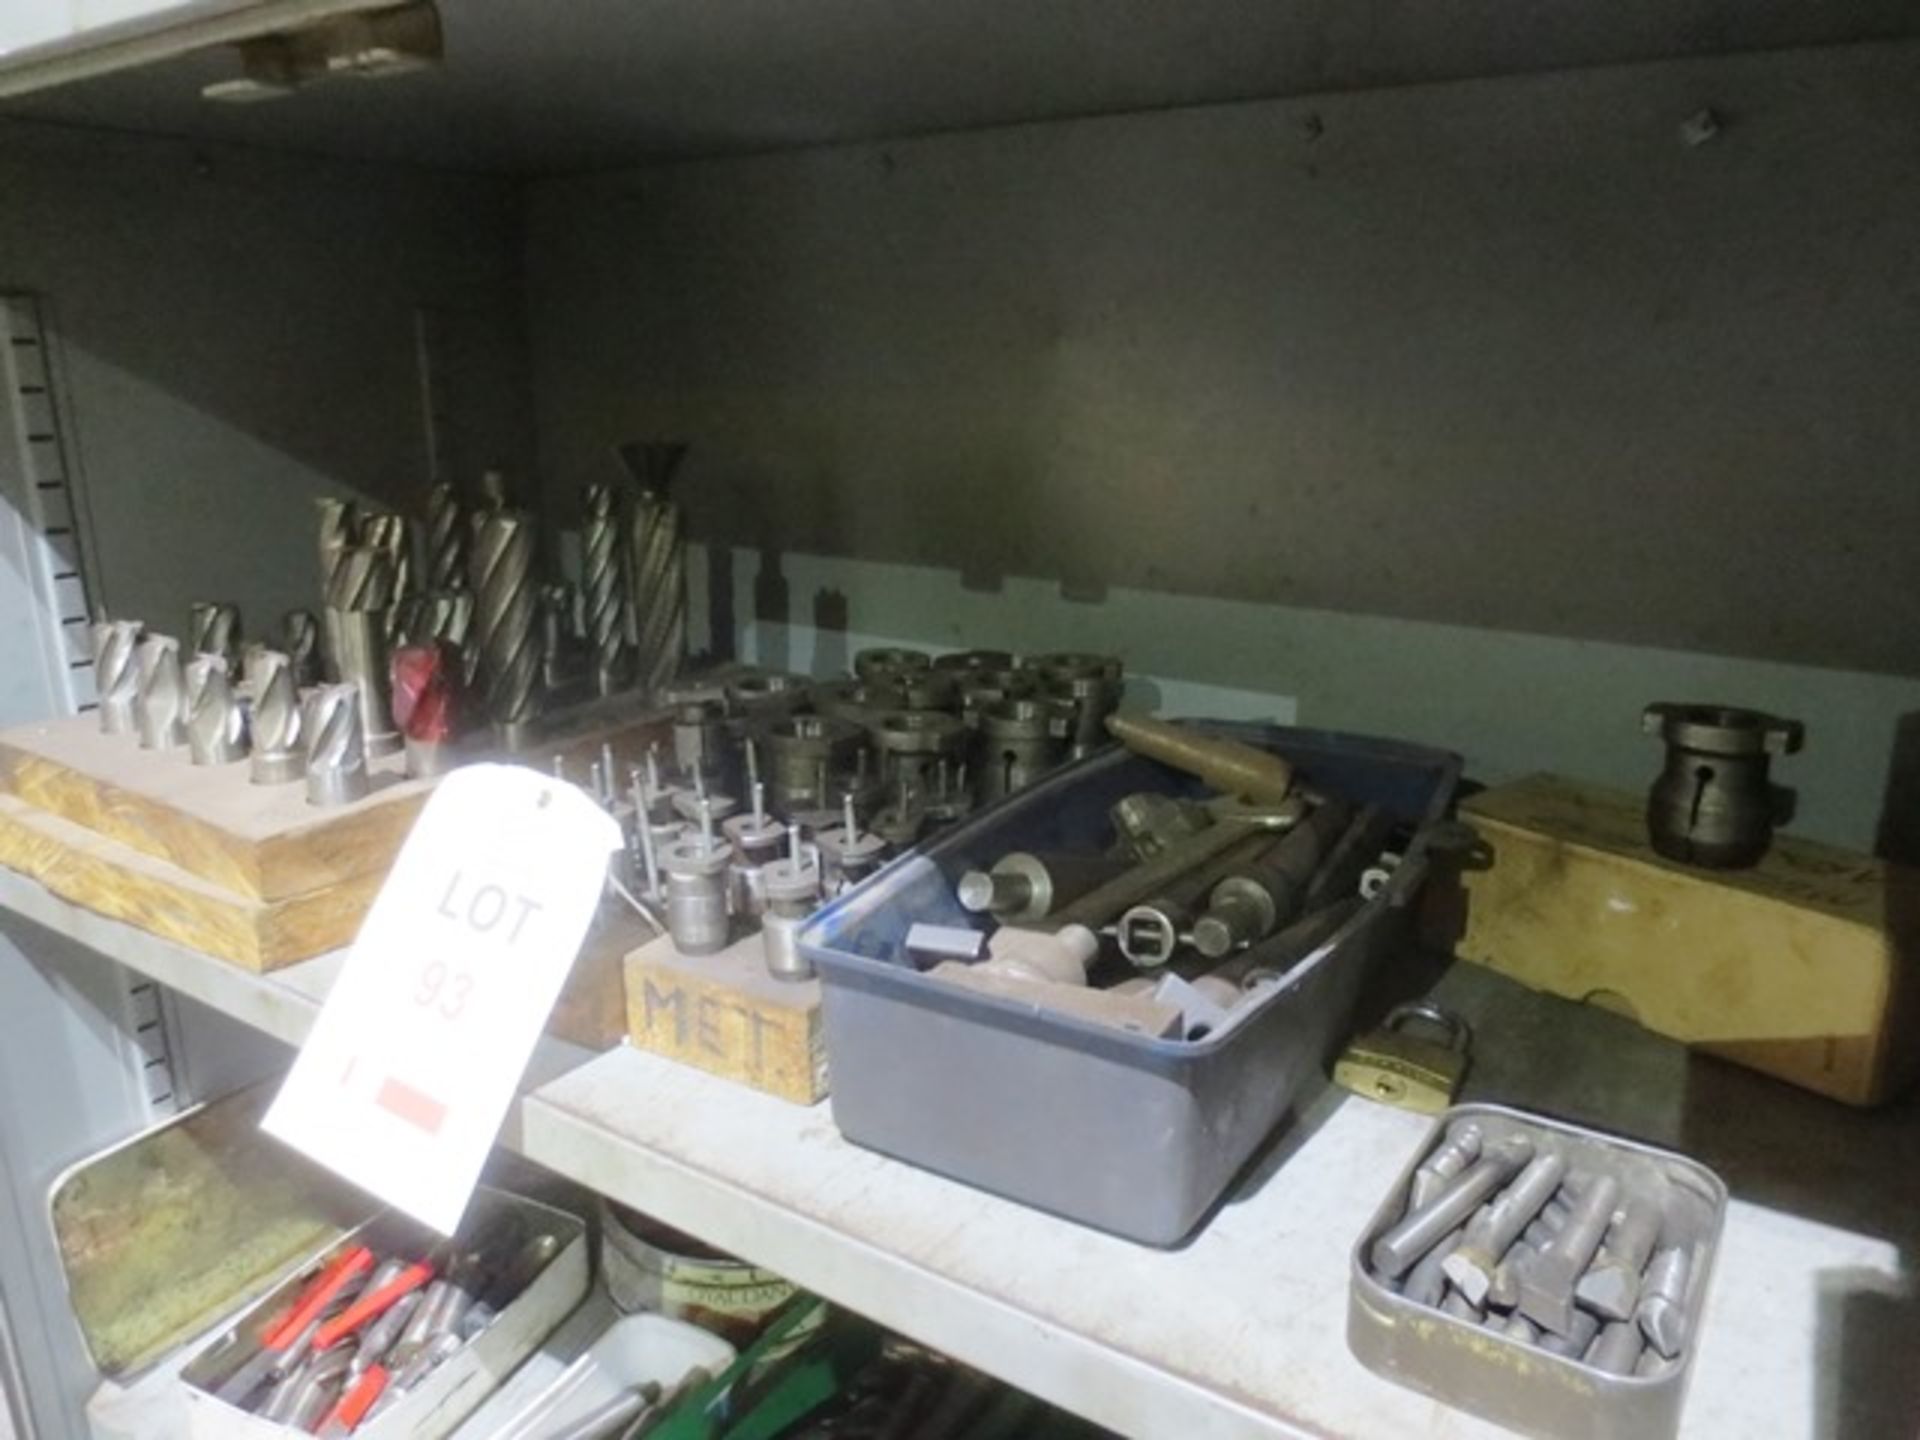 Contents of shelf to include imperial and metric collets, and various screw thread tooling bits